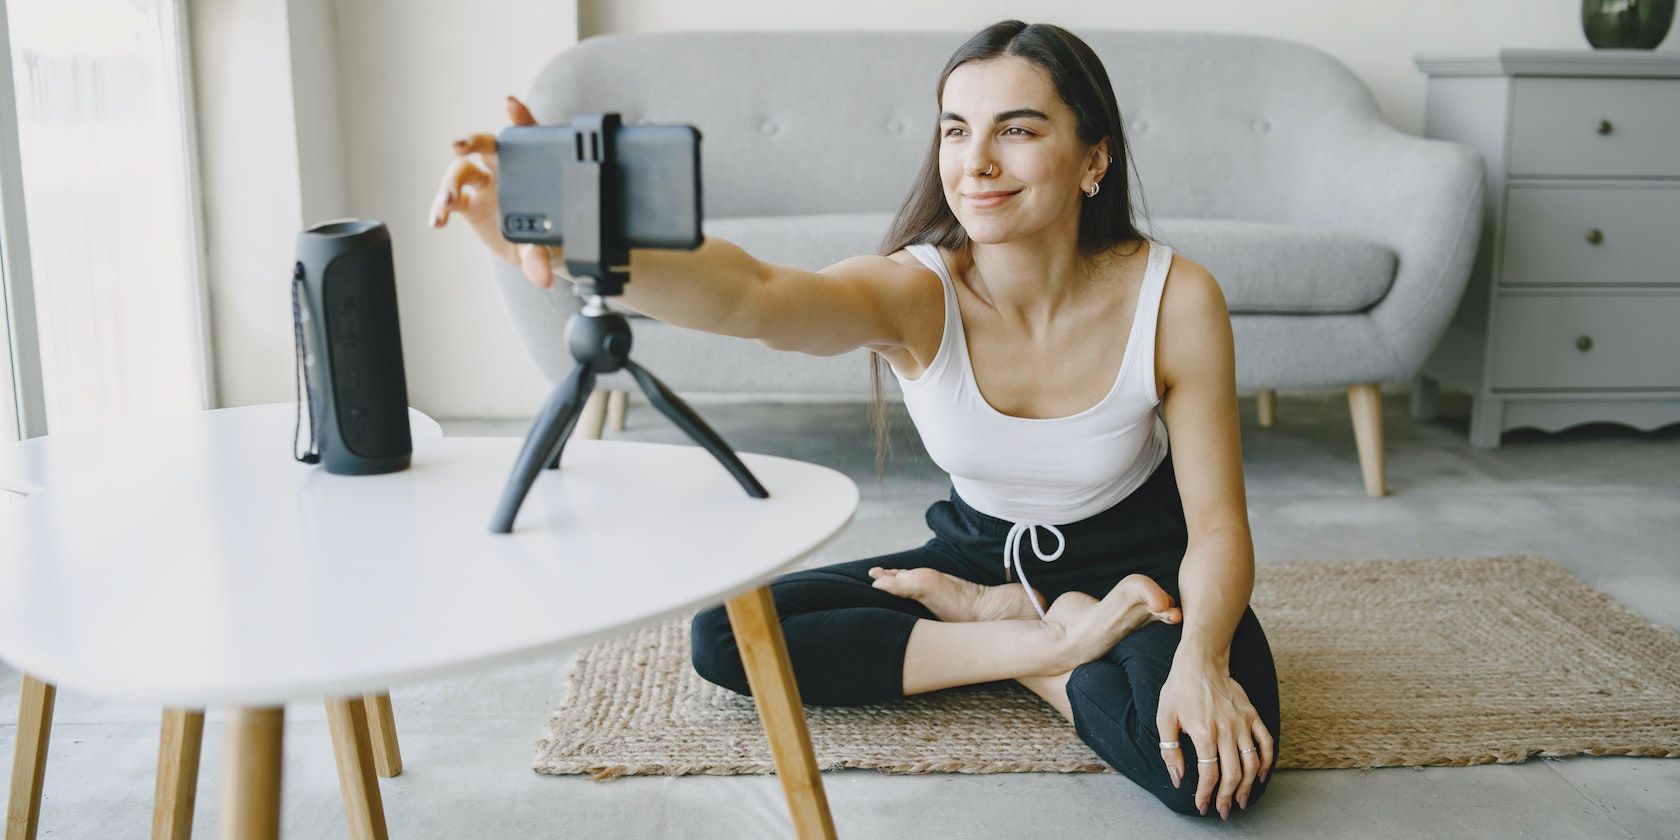 A woman recording herself with a phone and tripod stand